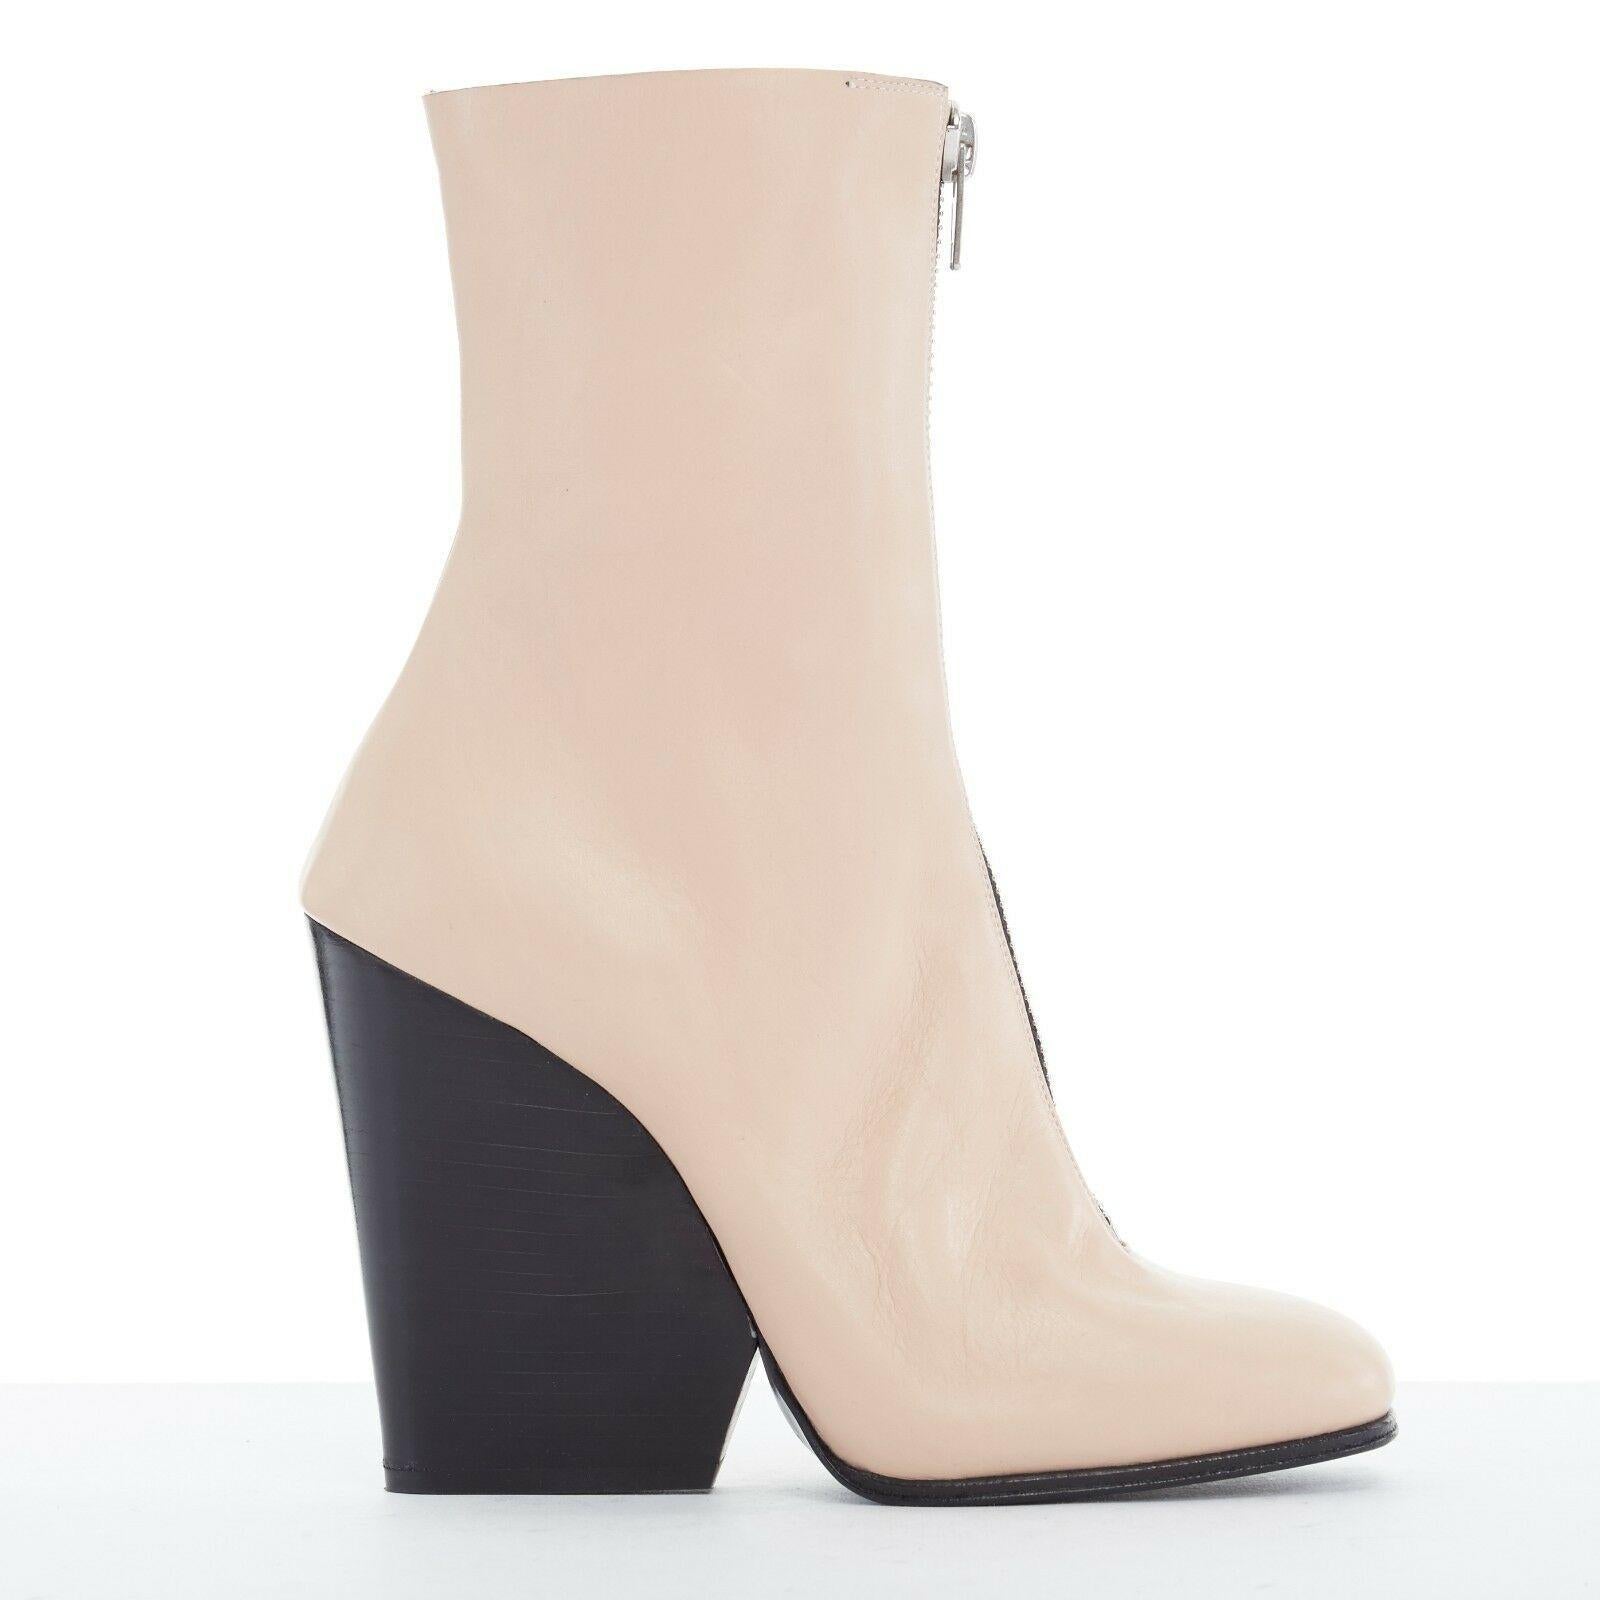 CELINE PHOEBE PHILO nude beige leather zip front square toe wedge boot shoe EU36

CELINE BY PHOEBE PHILO
Beige leather upper. Exposed zip front closure. Square toe. Black stacked wooden wedge heel. Ankle boots. Made in Italy

CONDITION
Good, this